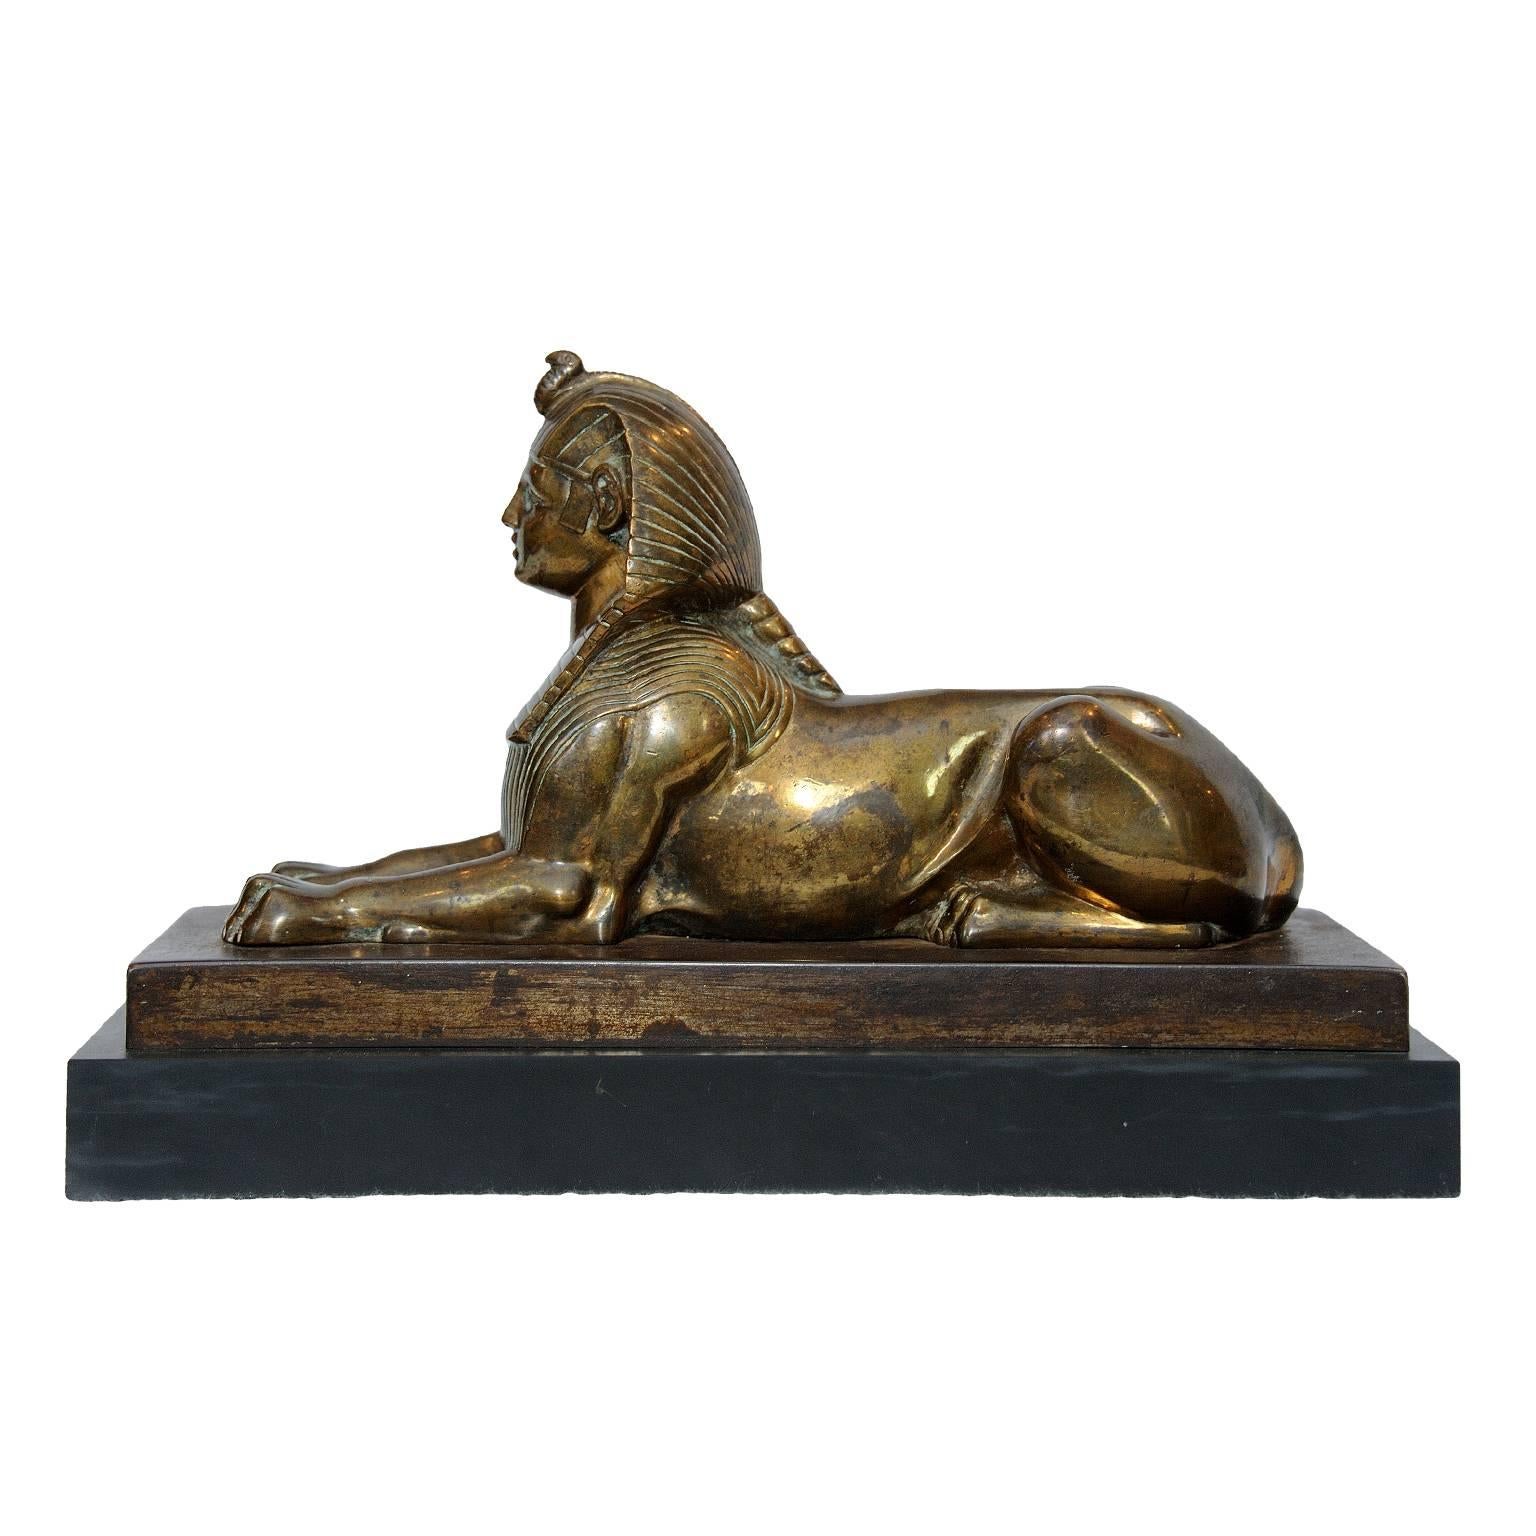 Polished English Early 19th Century Regency Period Bronze Sphinx, circa 1820 For Sale